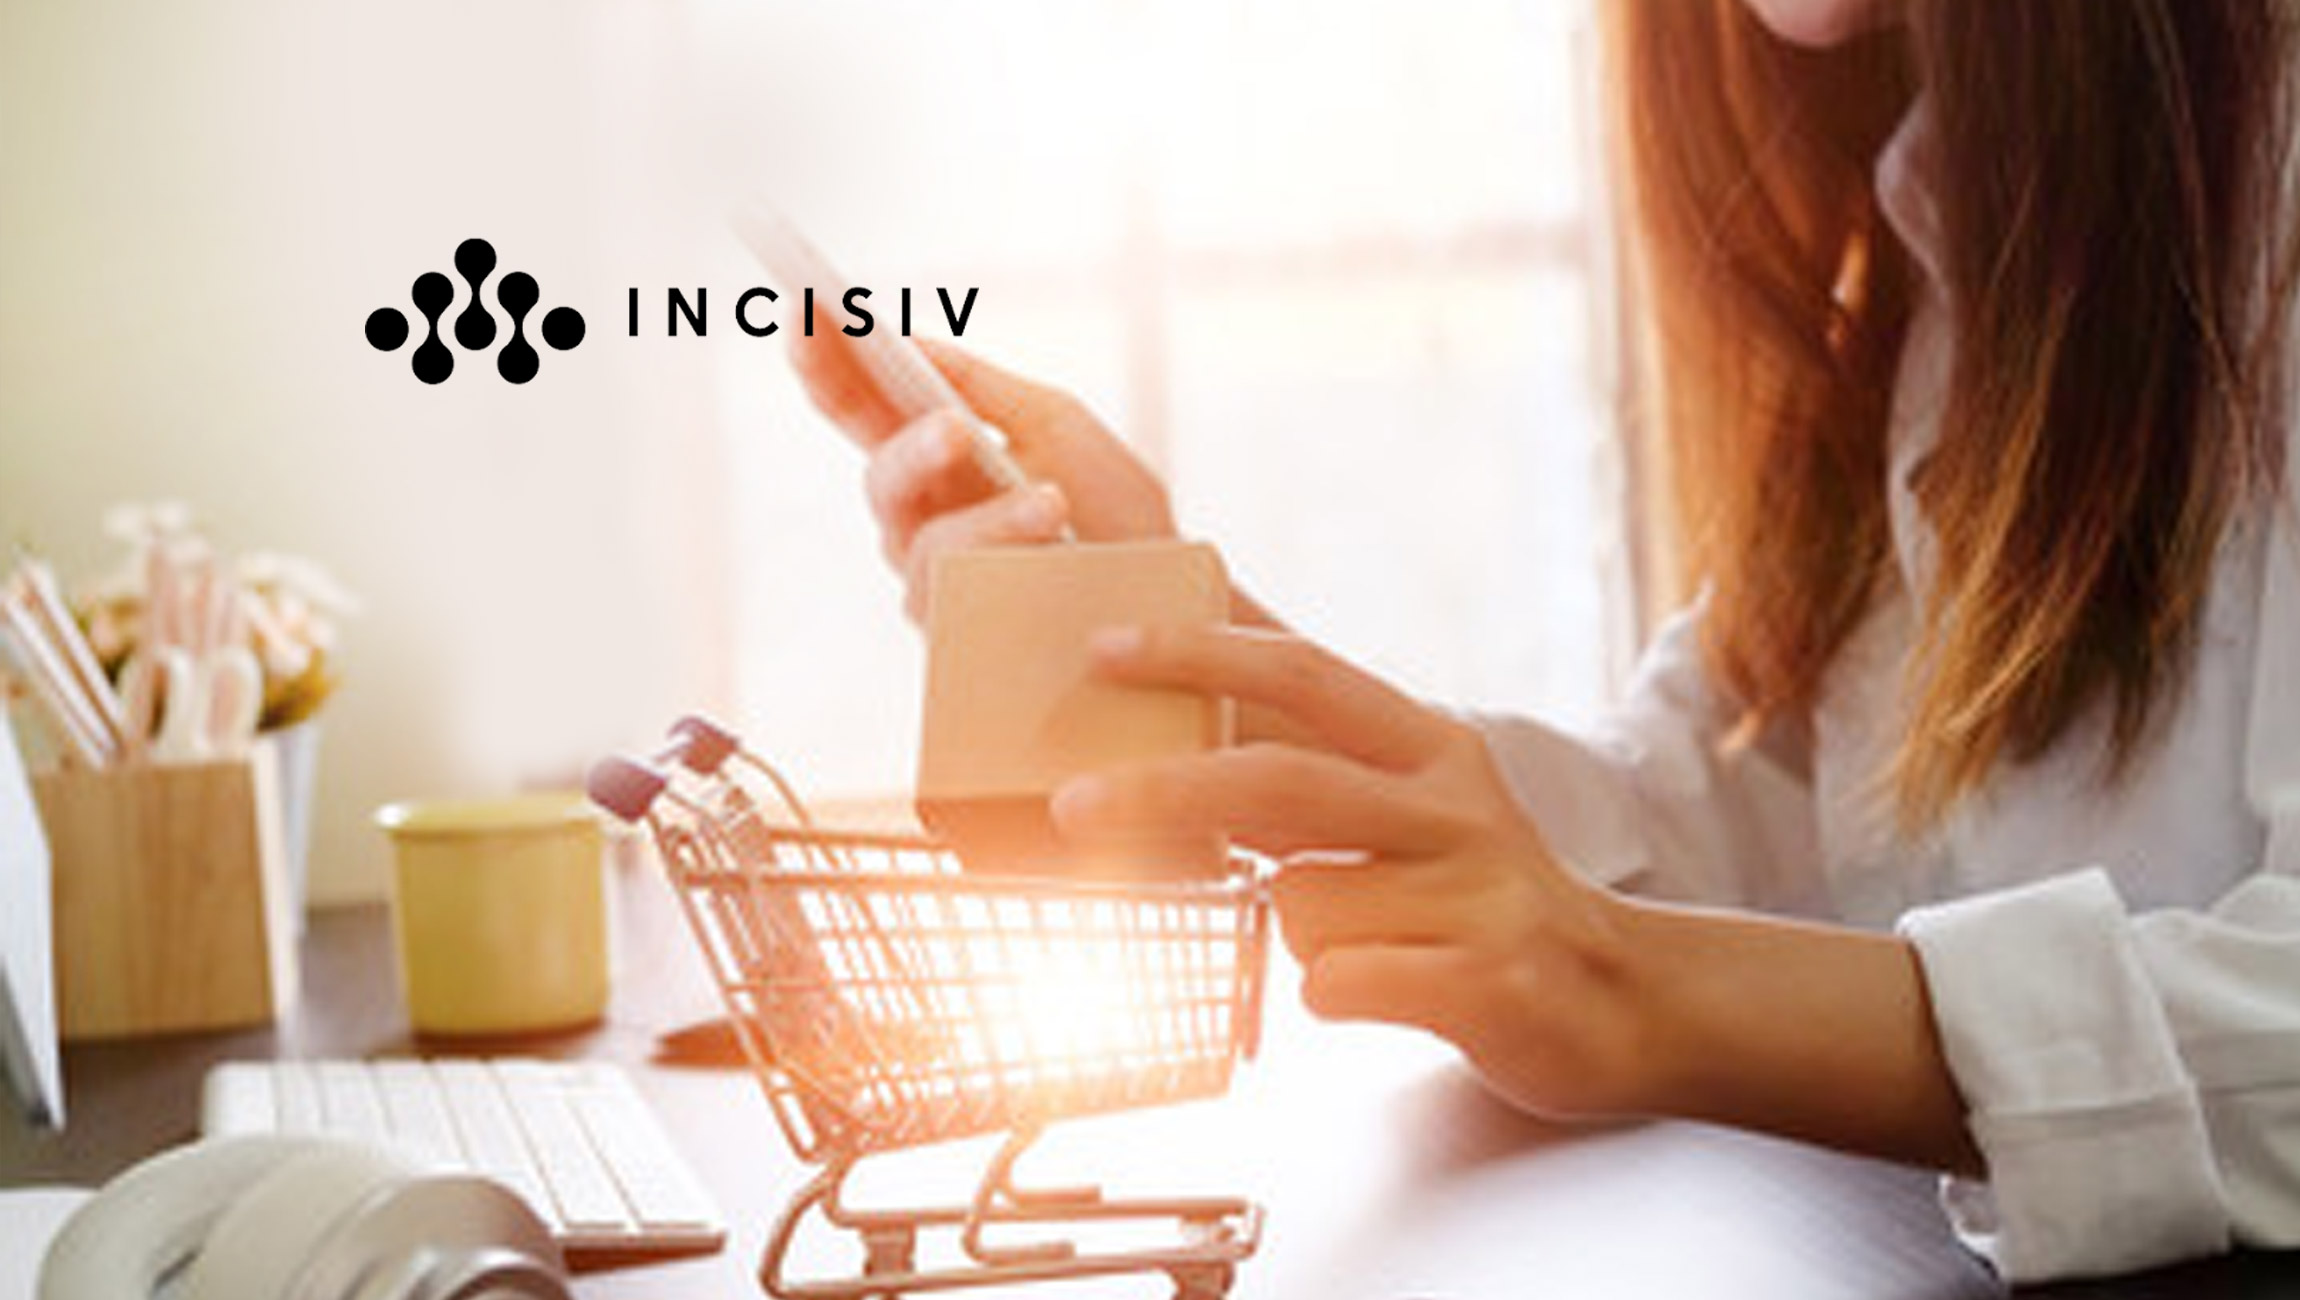 Incisiv and Wynshop Reveal Grocers Lost $11 Billion Due to ‘Unavailable’ or ‘Unsubstituted’ Items, According to H1 2022 Digital Grocery Performance Card